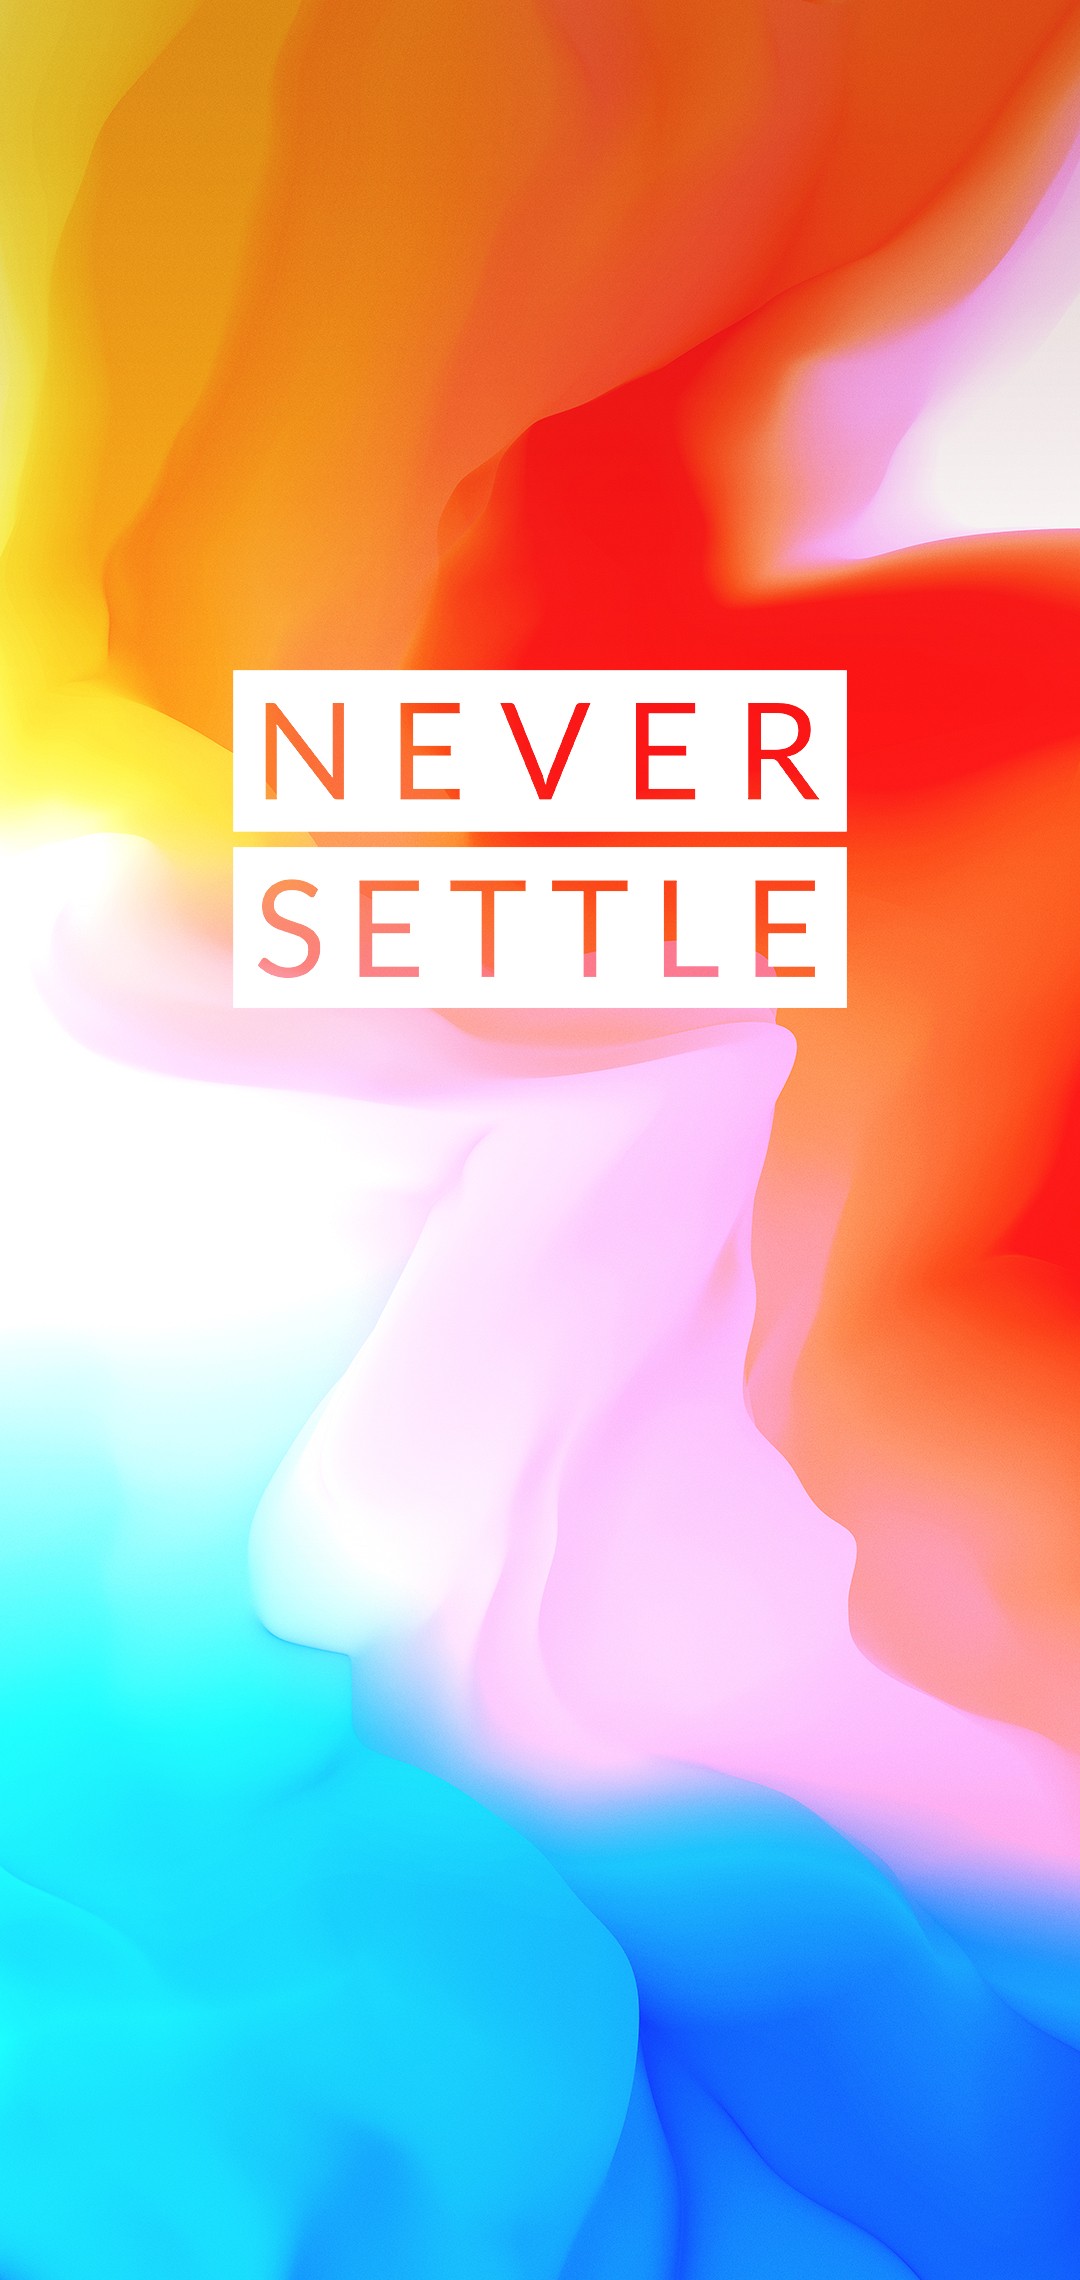 Never settle by cosmo